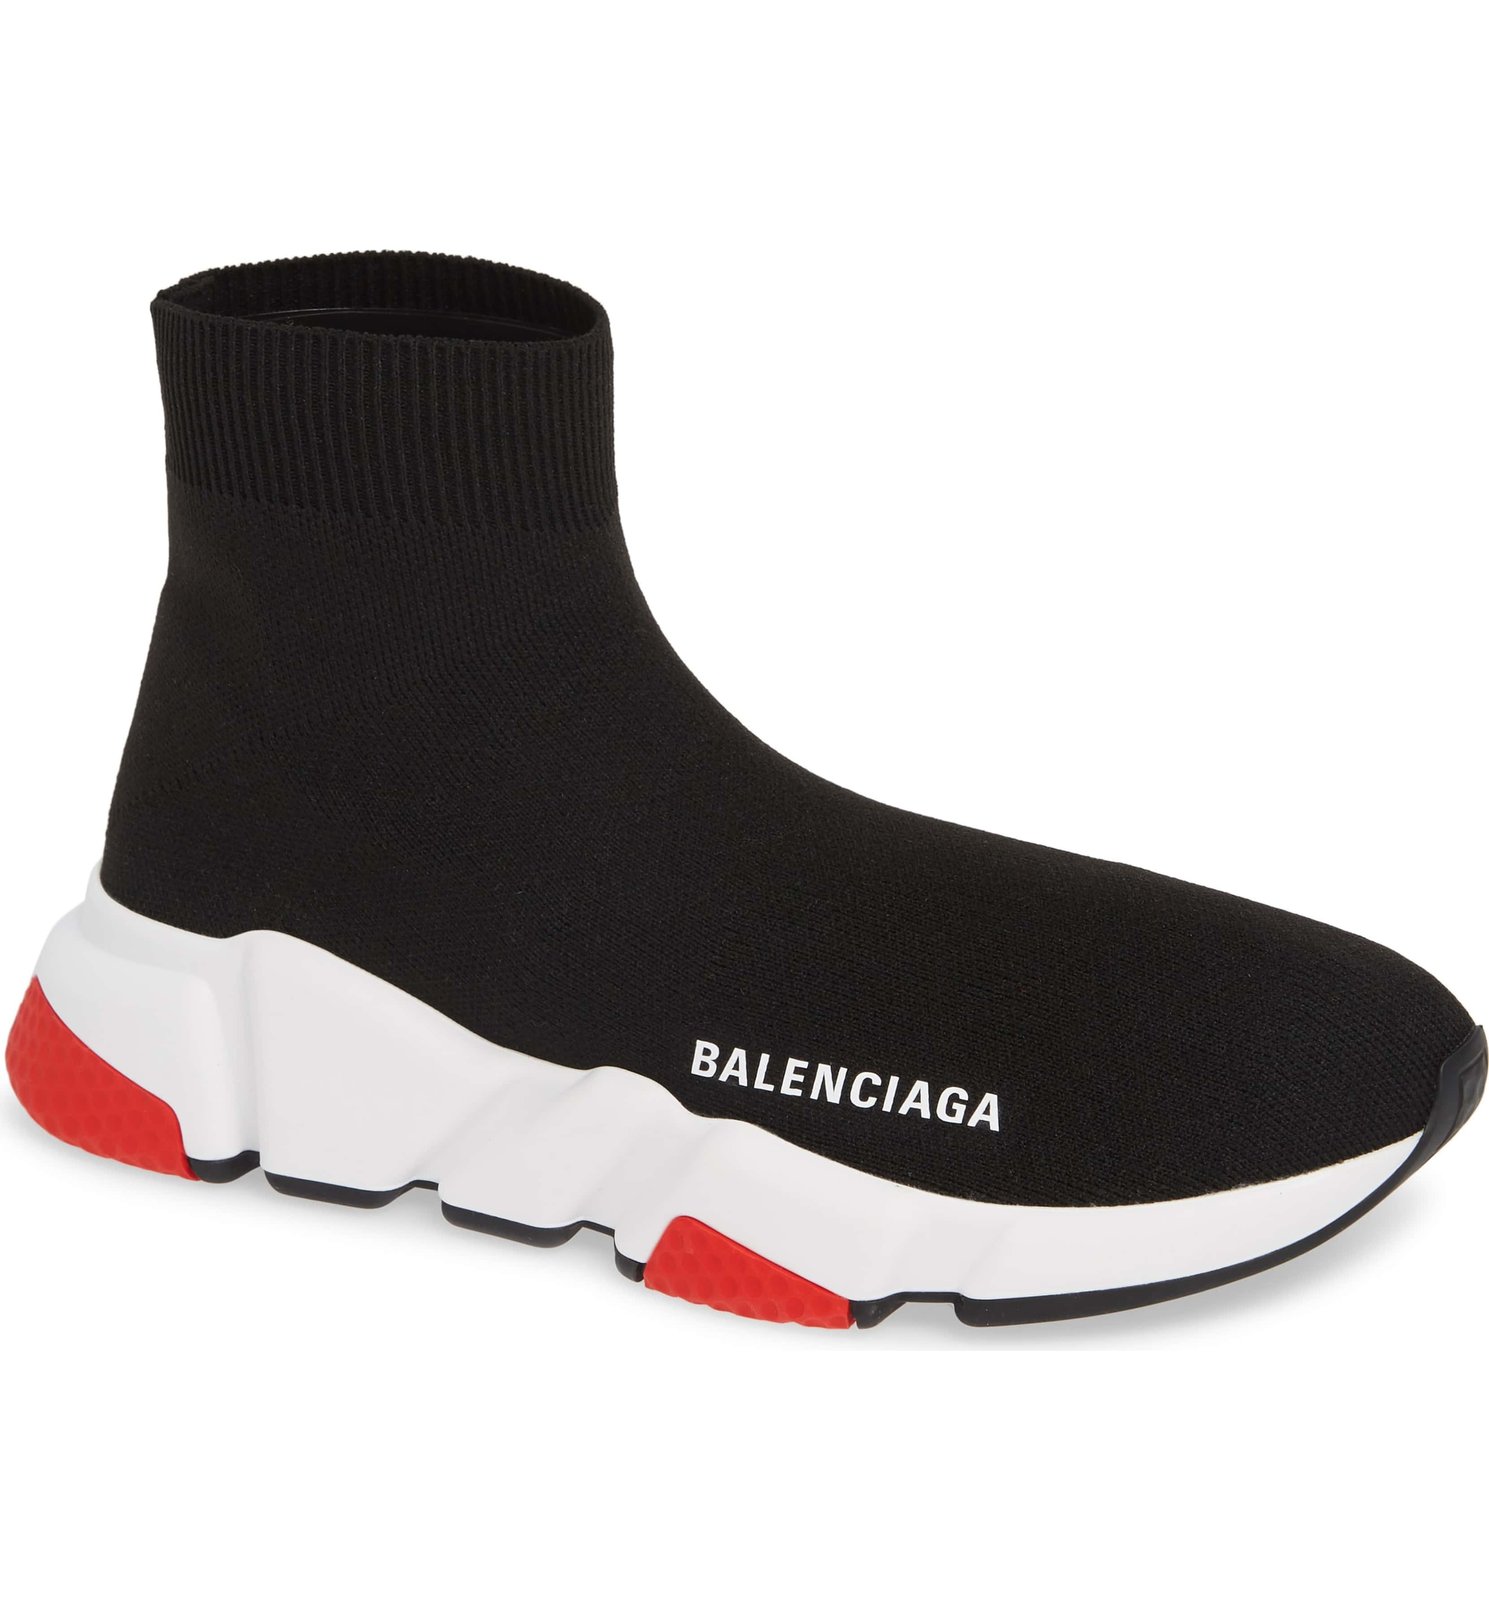 balenciaga trainers black and red